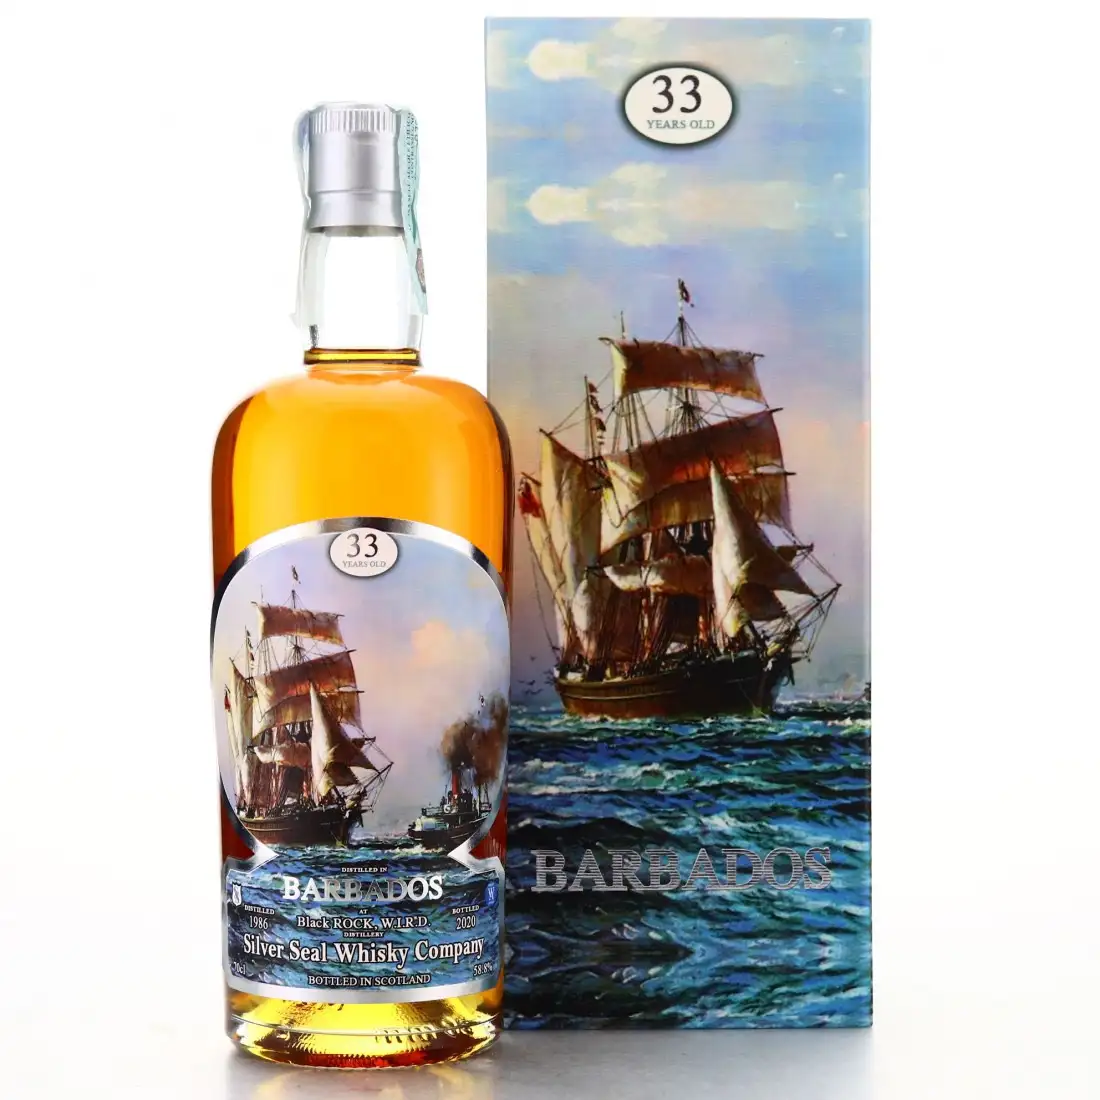 Image of the front of the bottle of the rum Barbados BRS